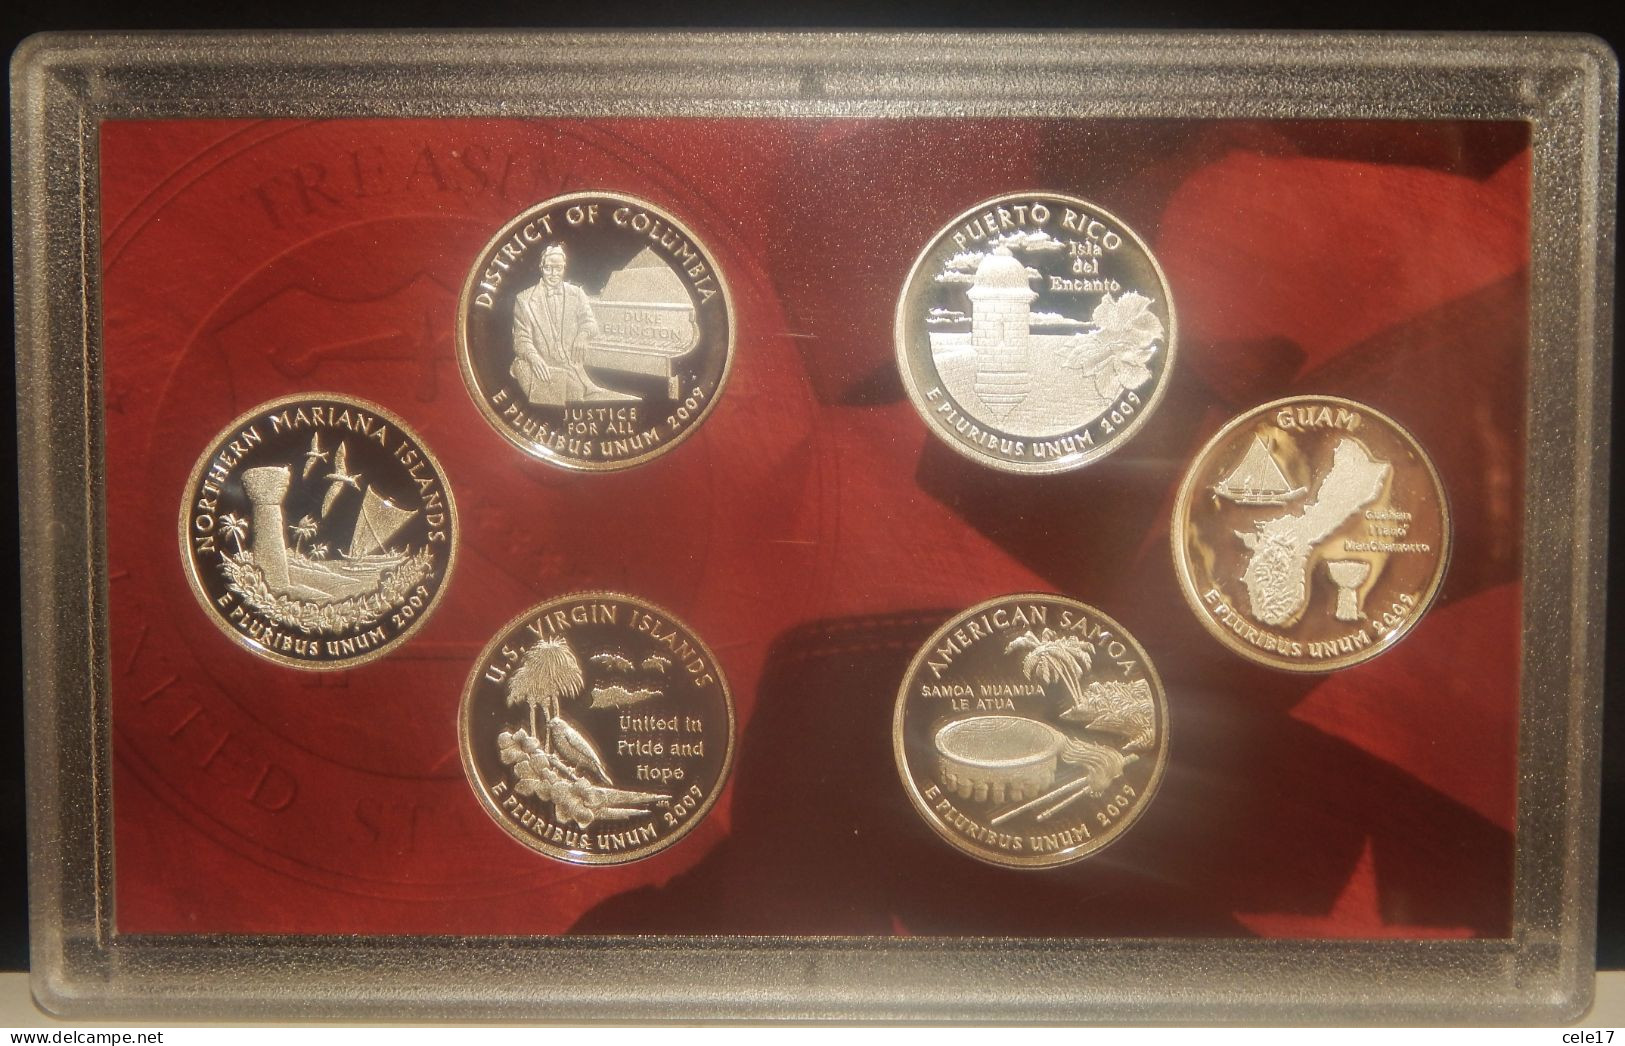 UNITED STATE MINT SILVER PROOF SET 2009